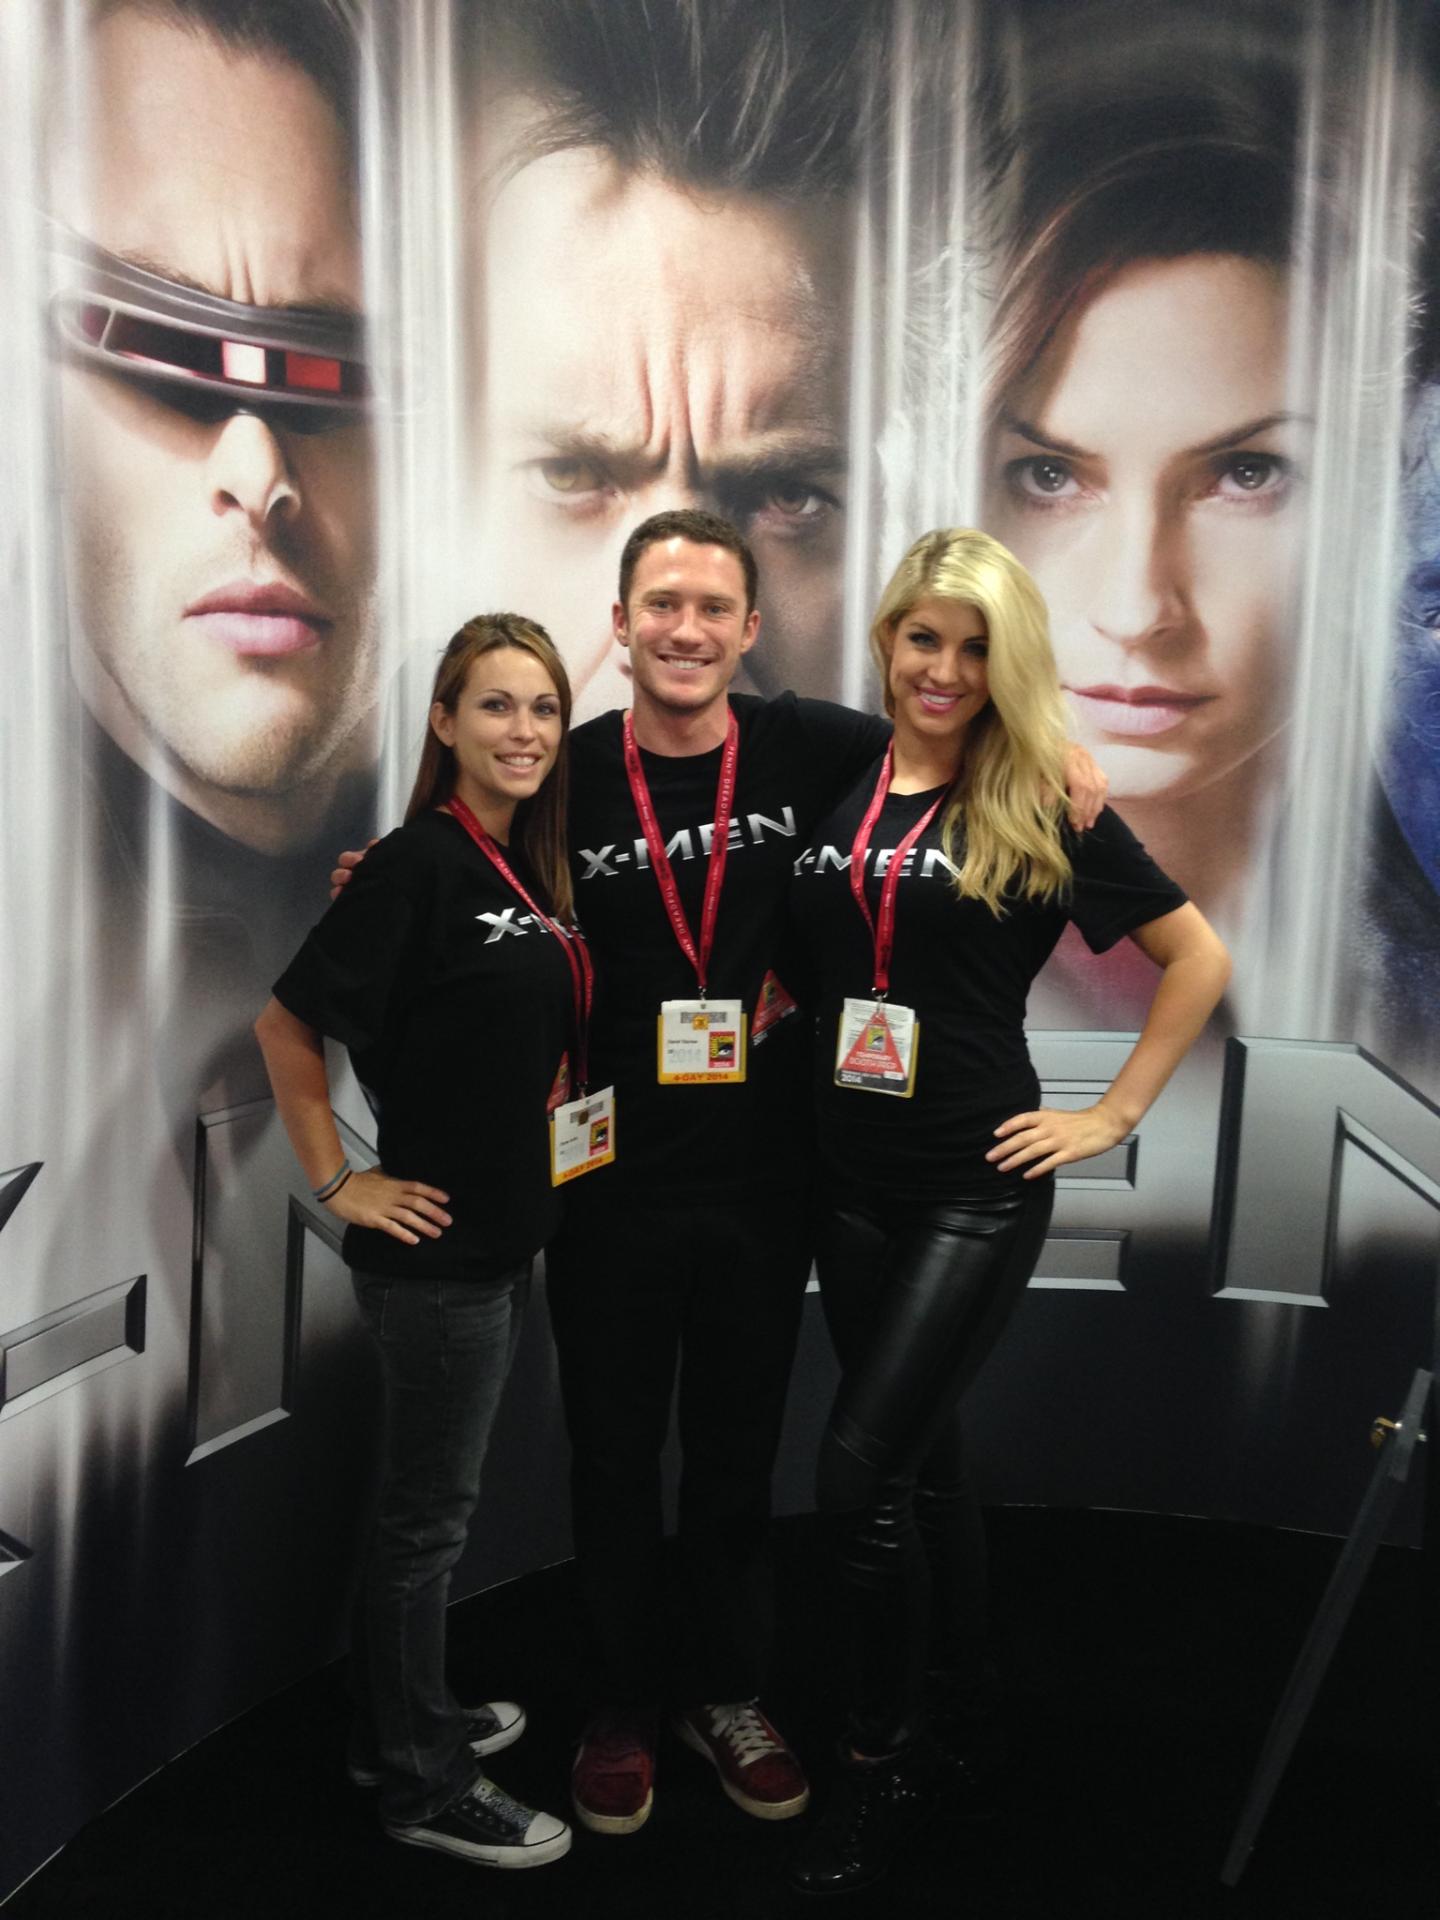 X-Men Comic Con event workers pose in front of movie poster